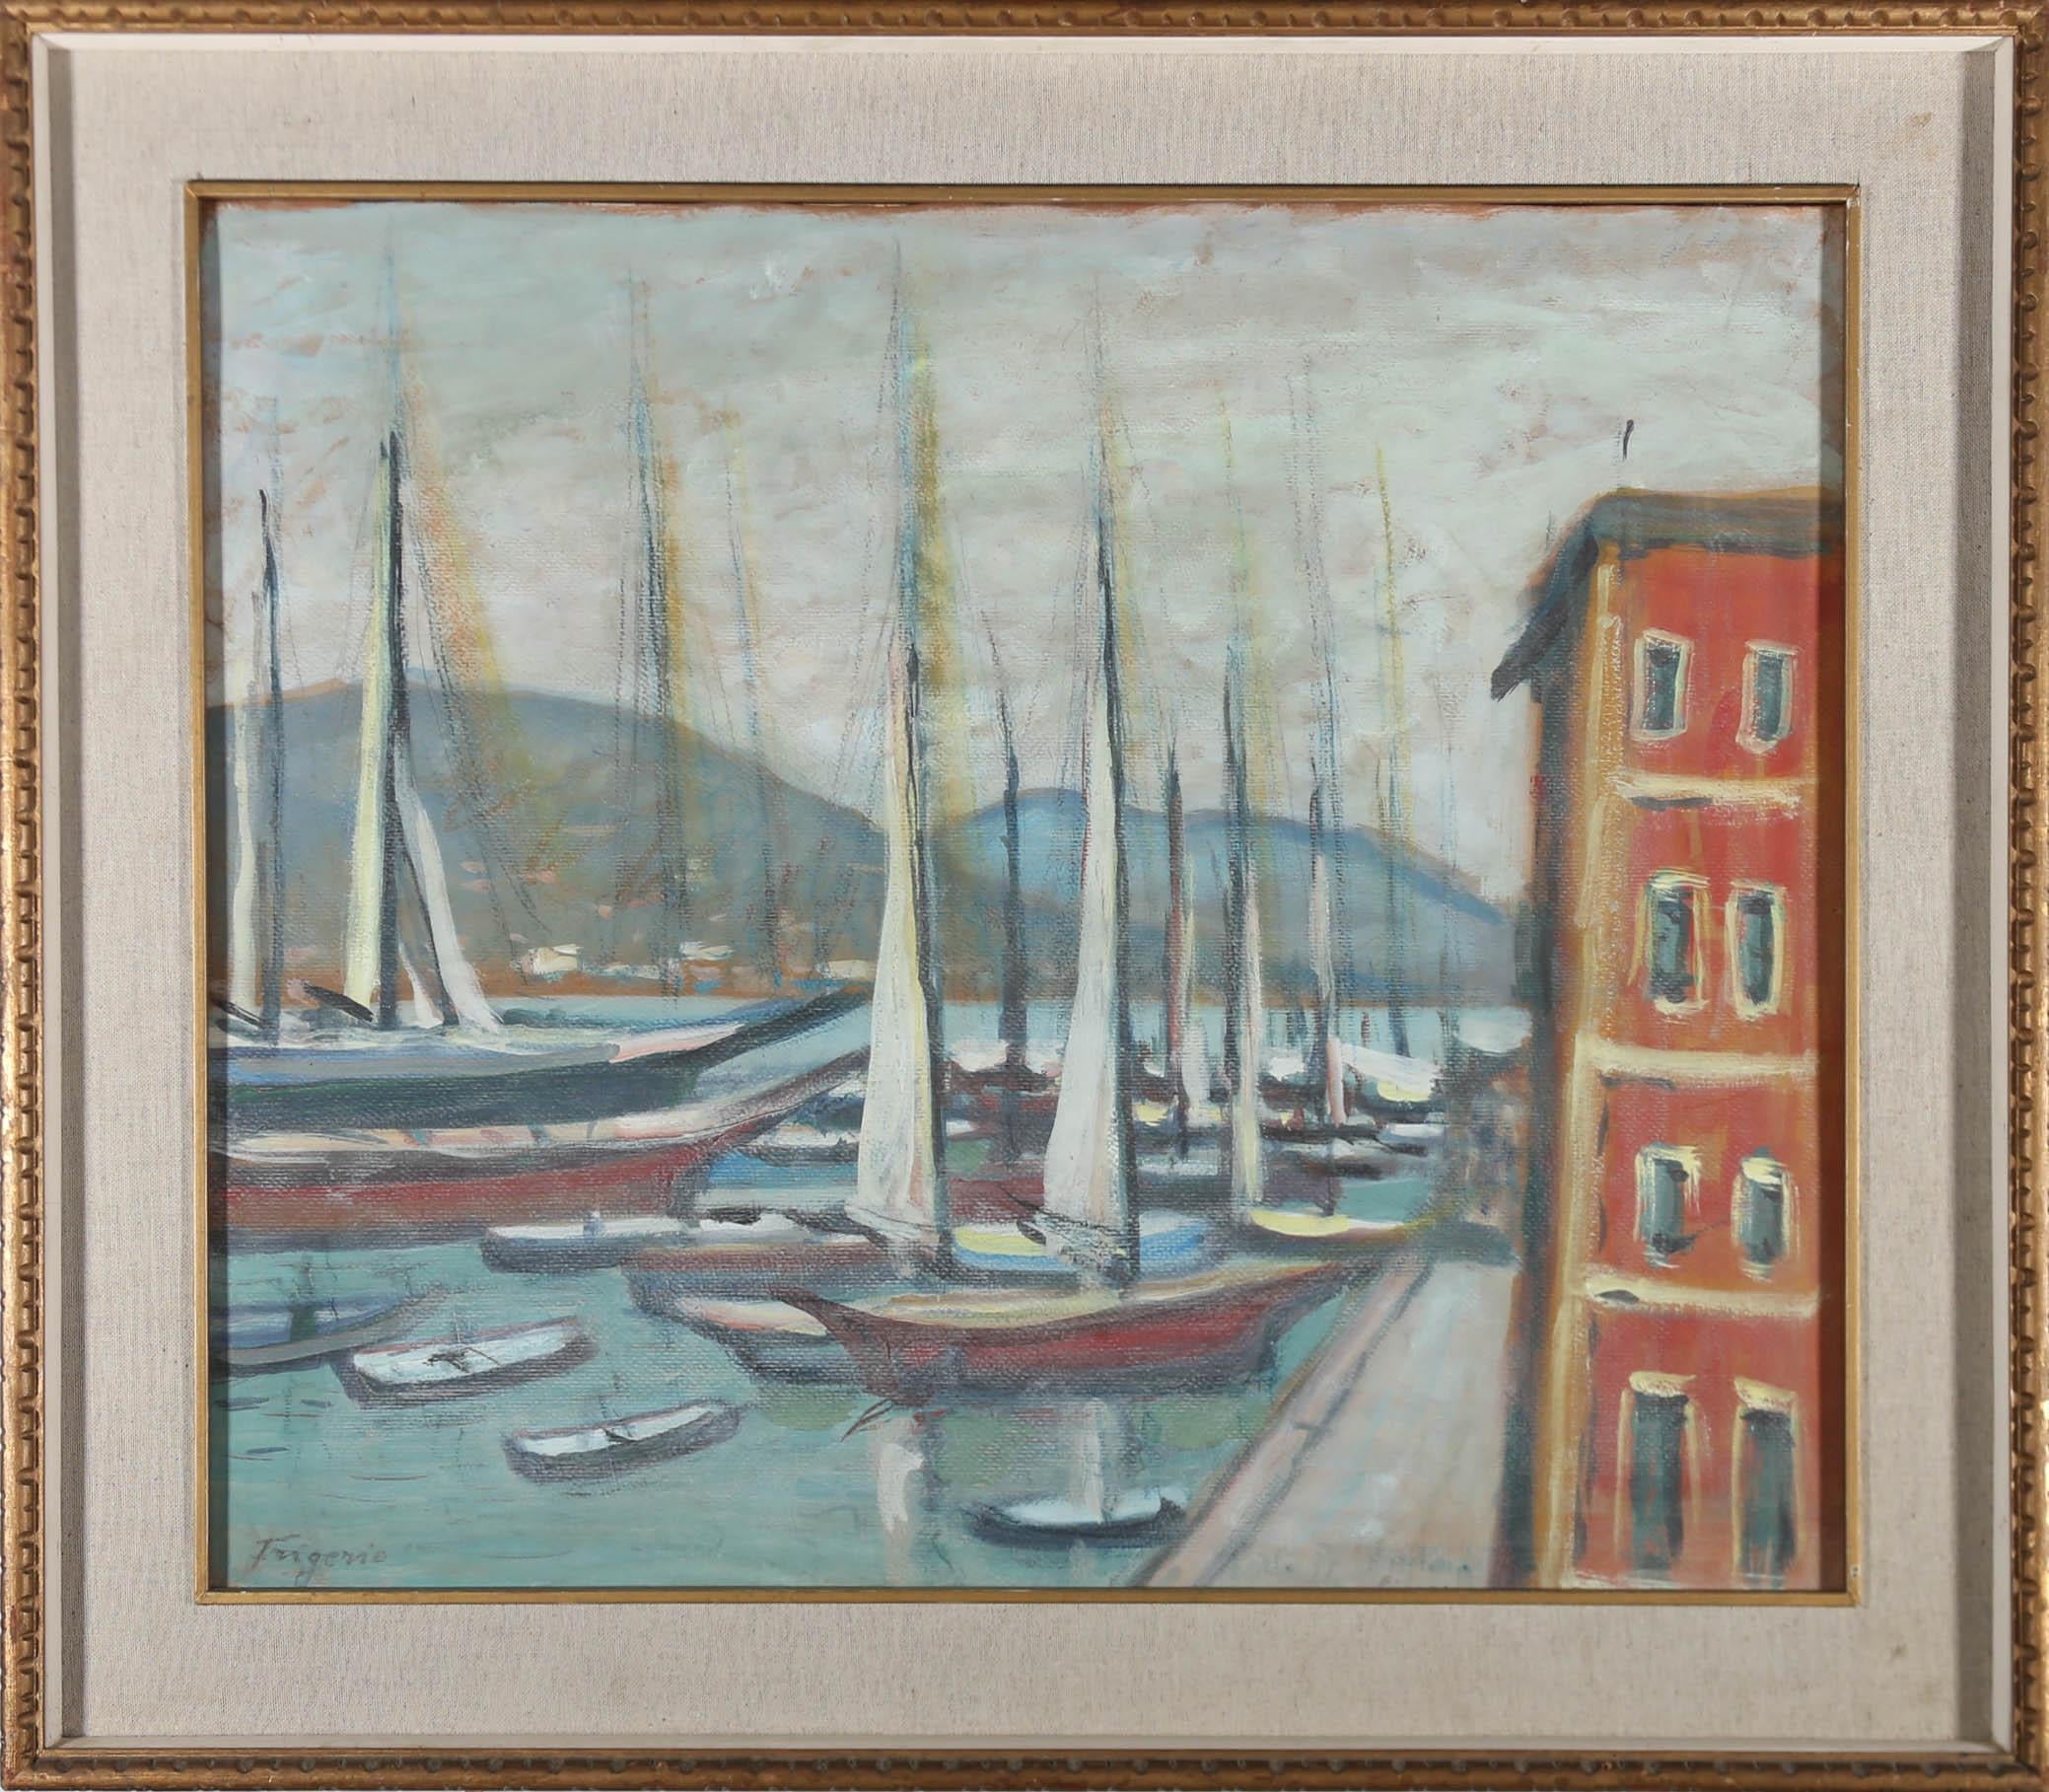 A striking early 20th century harbour scene showing boats moored near Leyland in the Netherlands. The artist has signed to the lower left and inscribed "Liguze" (Leyland) to the lower right, partially hidden by the frame. Presented in a 20th Century